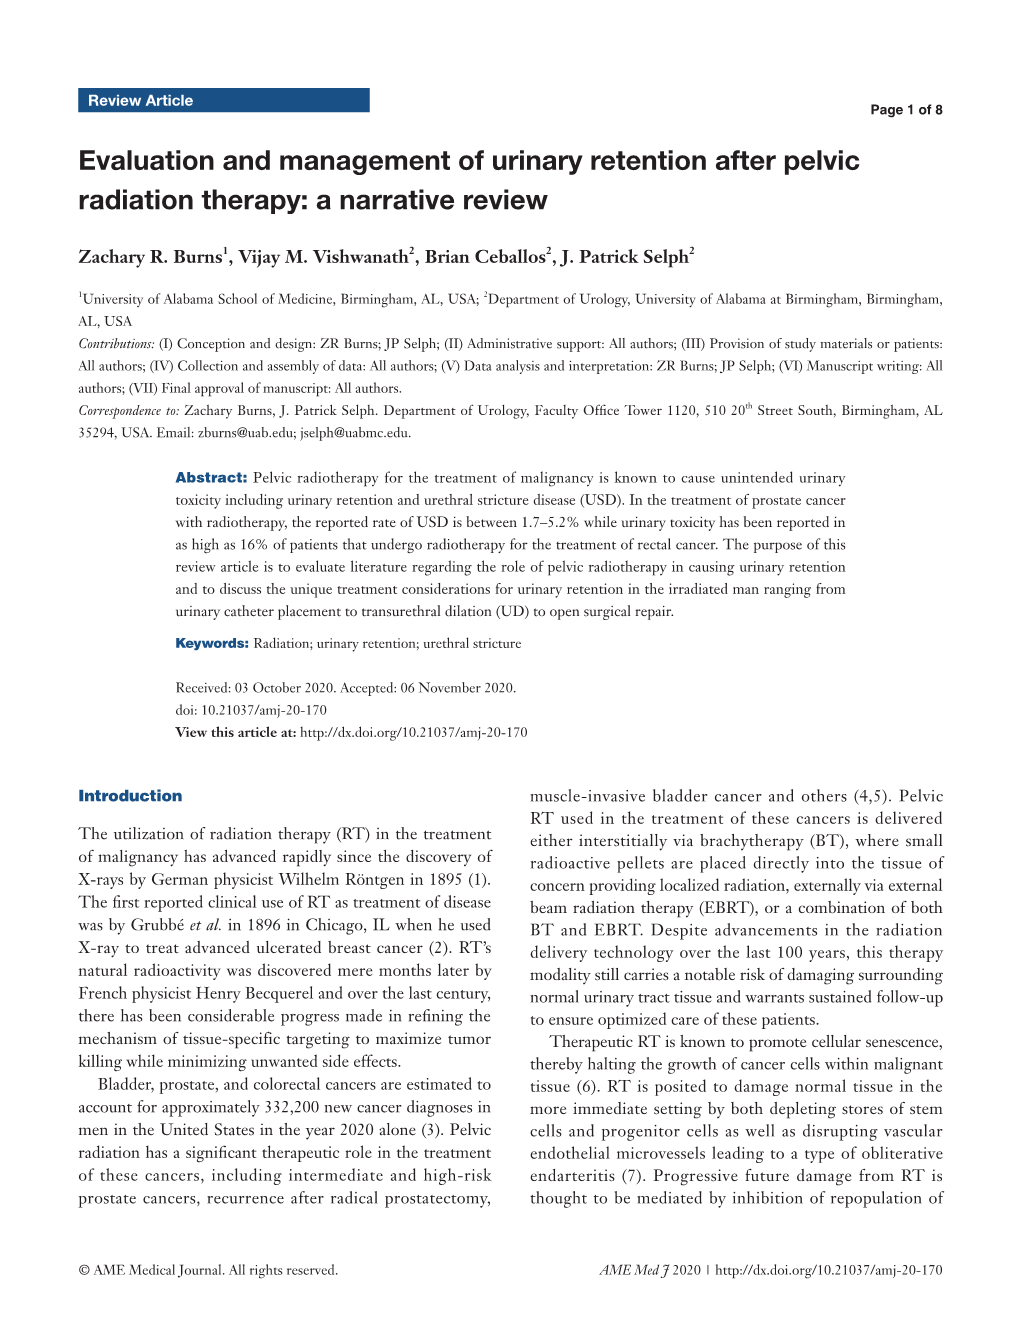 Evaluation and Management of Urinary Retention After Pelvic Radiation Therapy: a Narrative Review